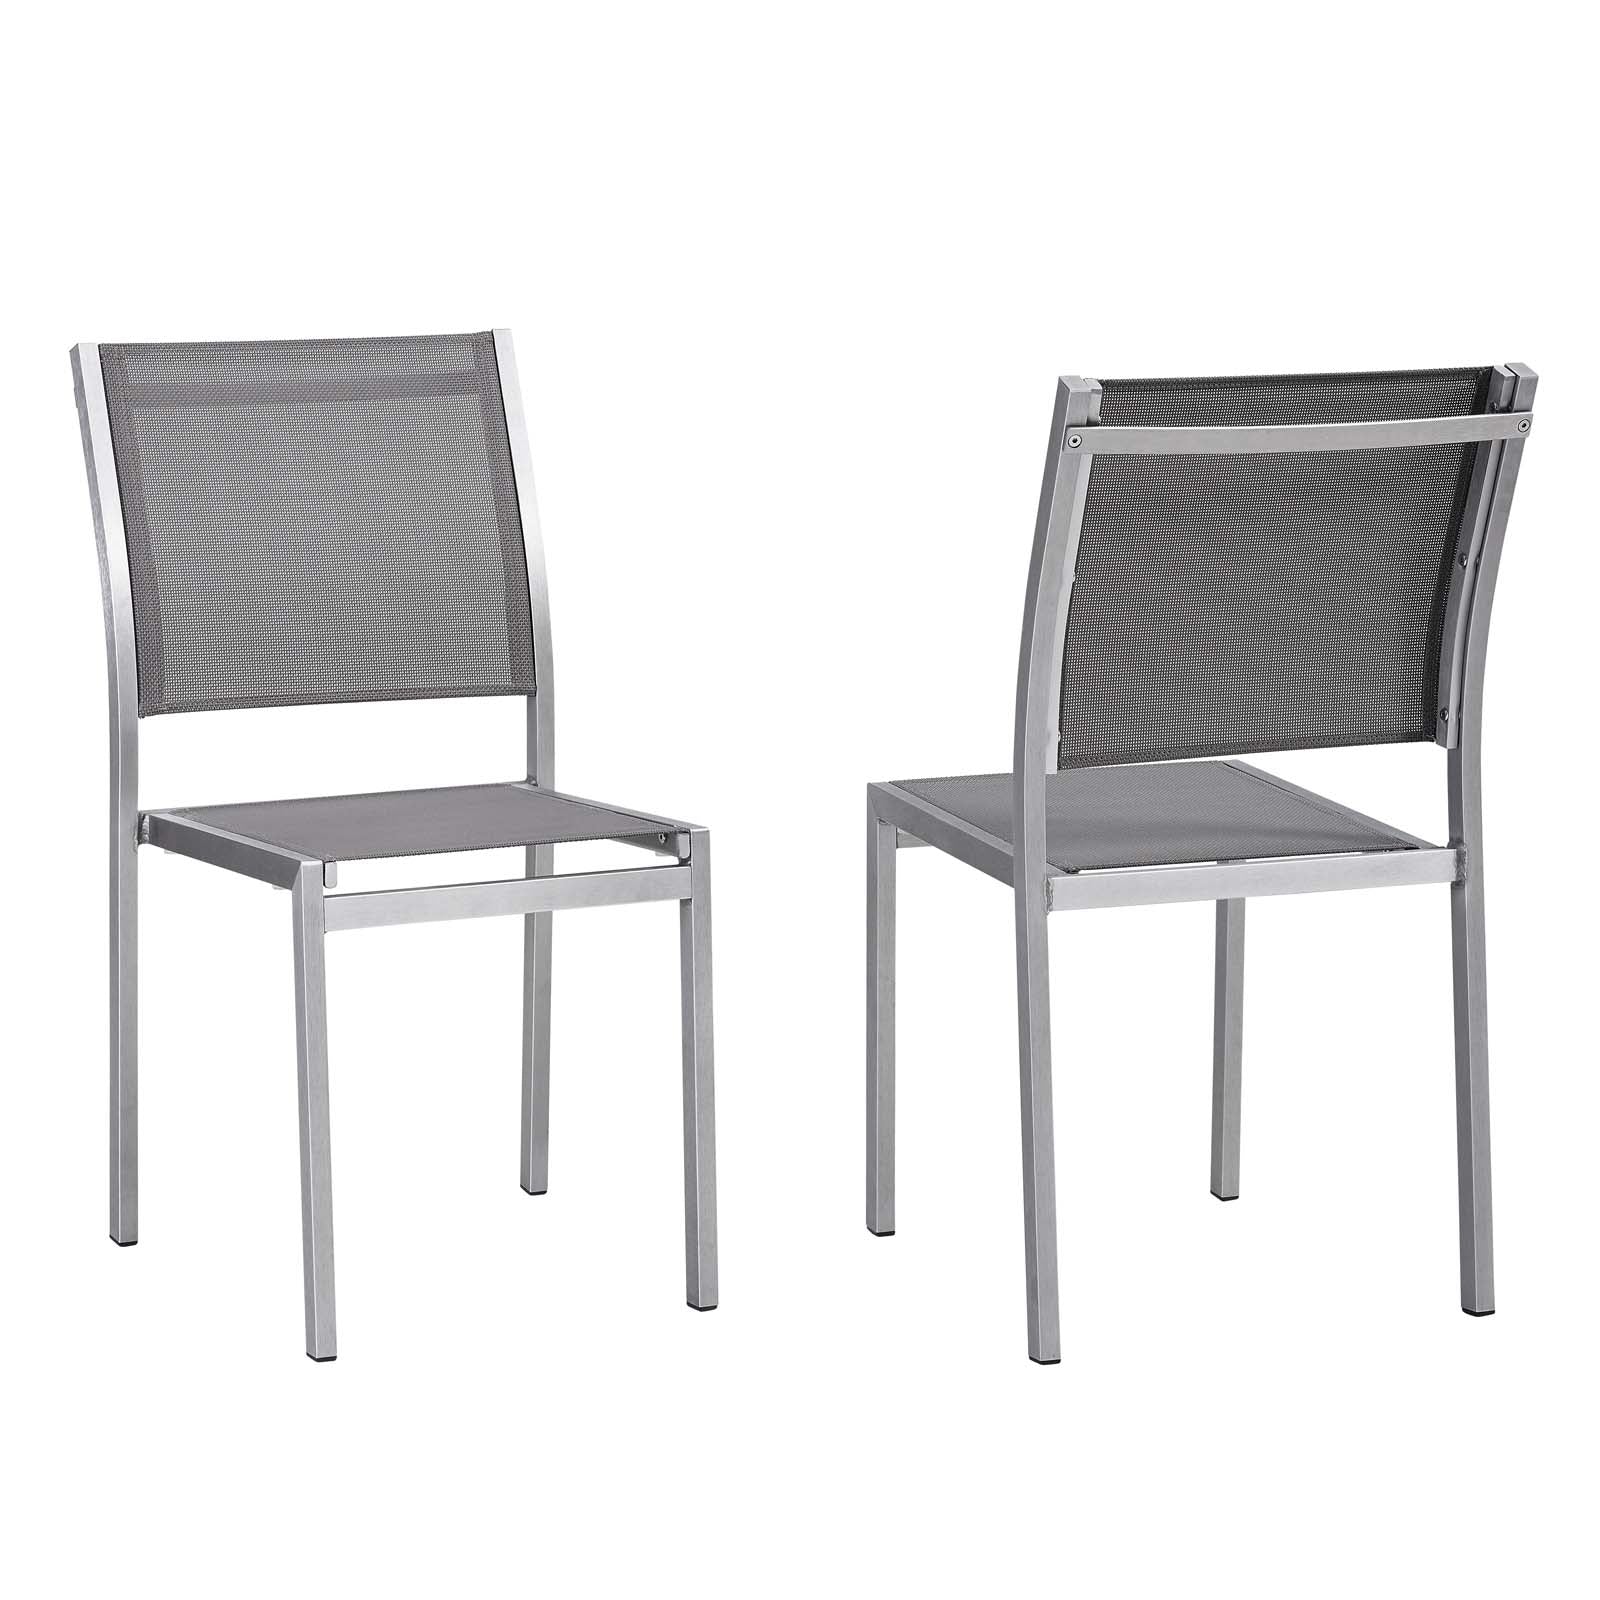 Modway Outdoor Dining Chairs - Shore Side Chair Outdoor Patio Aluminum Set of 2 Silver Gray